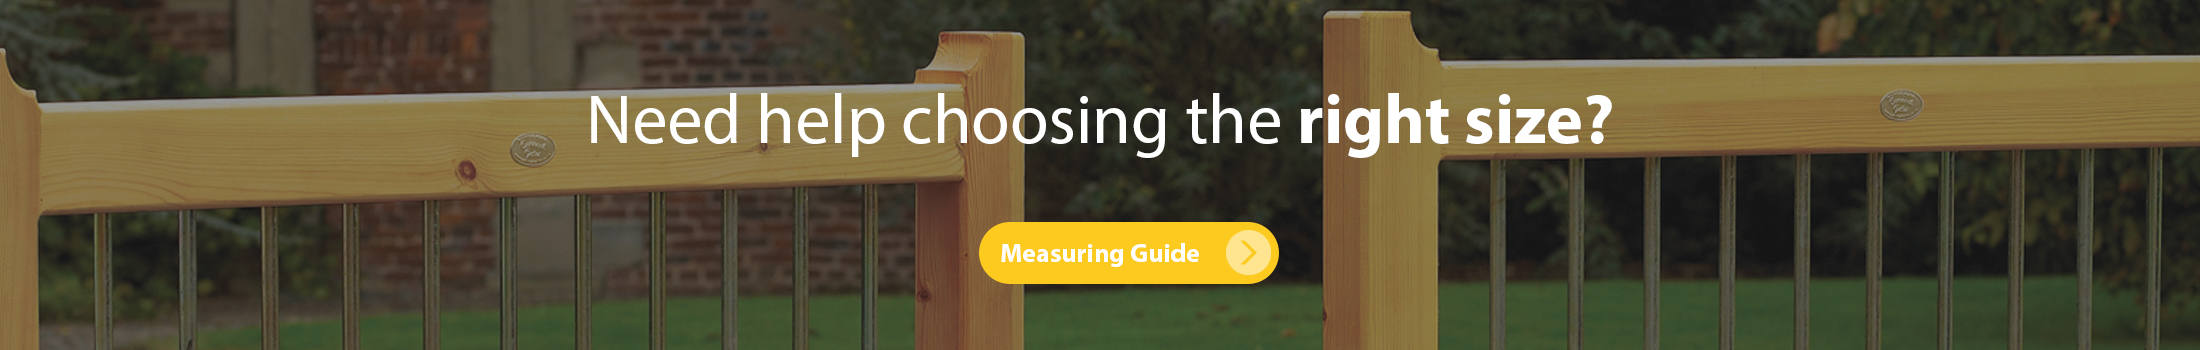 Discover more about ordering sizes by navigating to the measuring guide